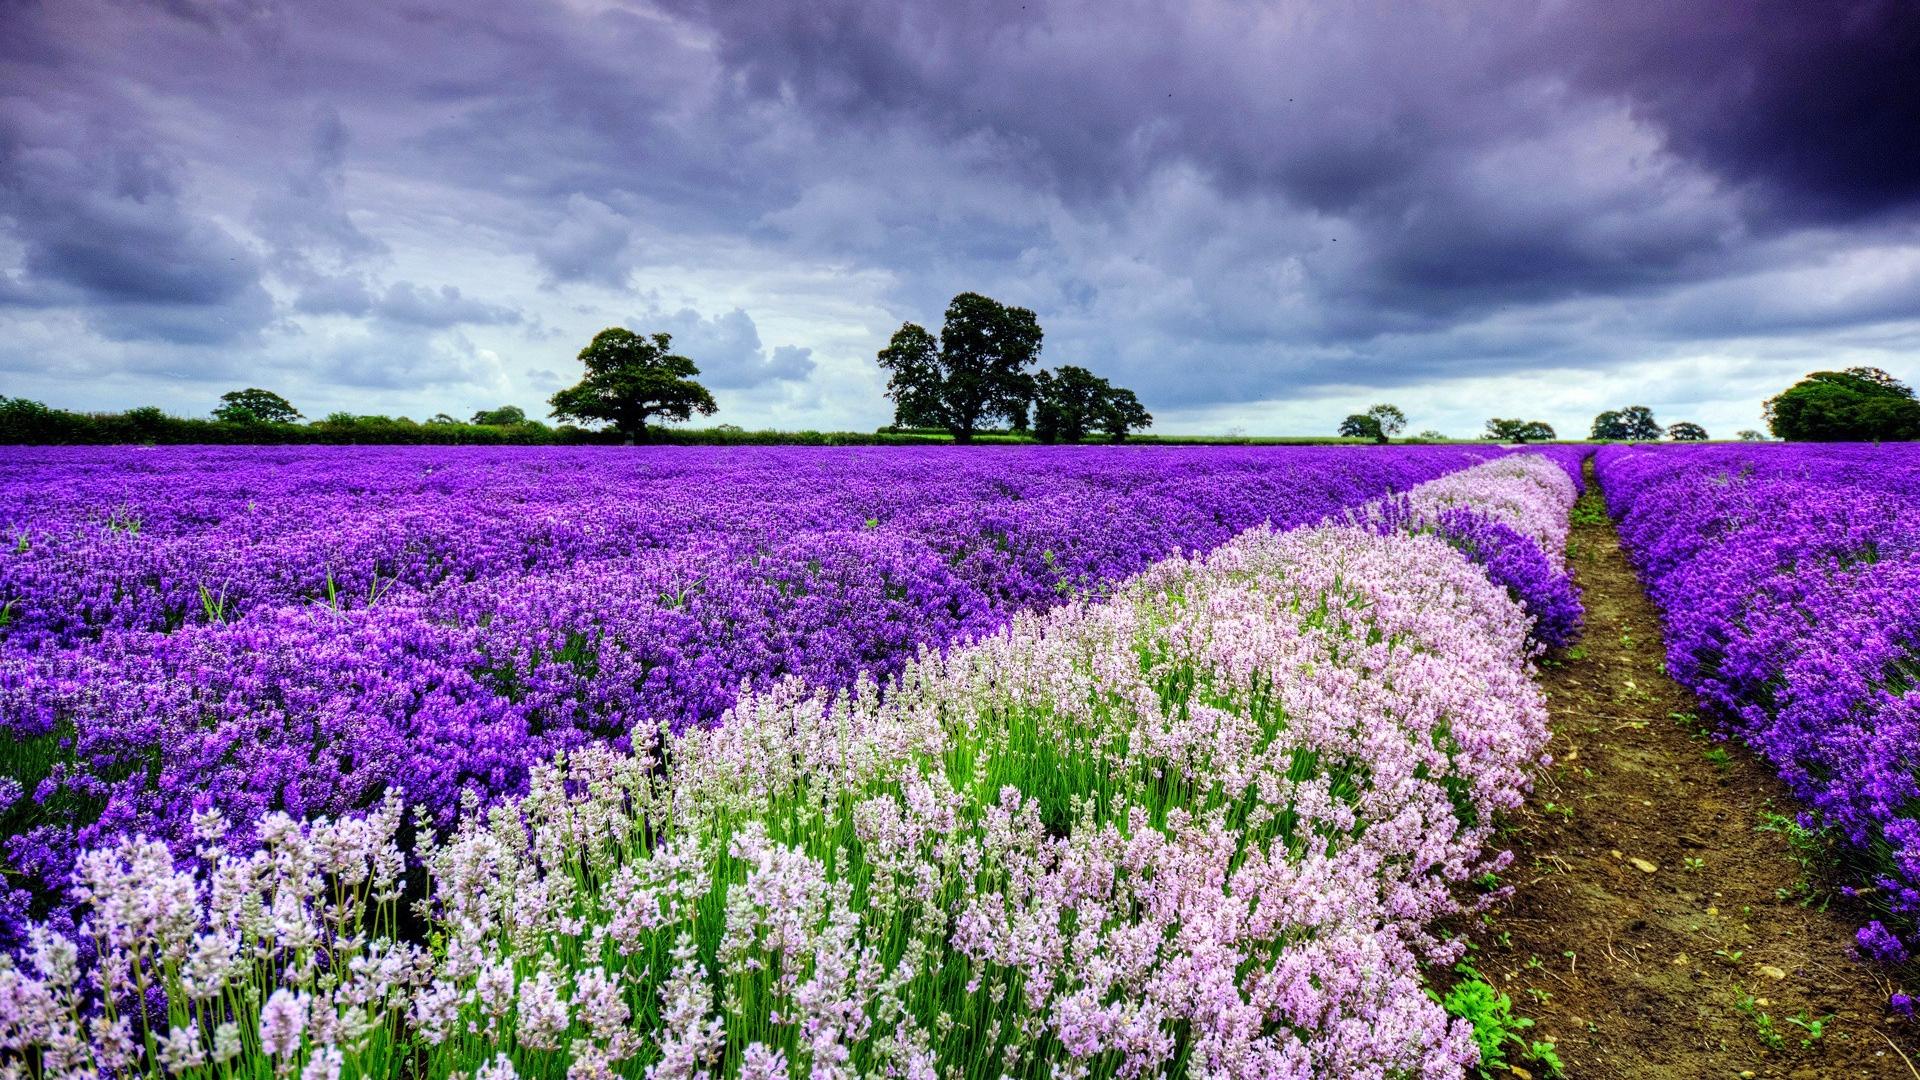 Spring Flowers Images Wallpapers | Flowers Wallpapers Gallery - PC ...